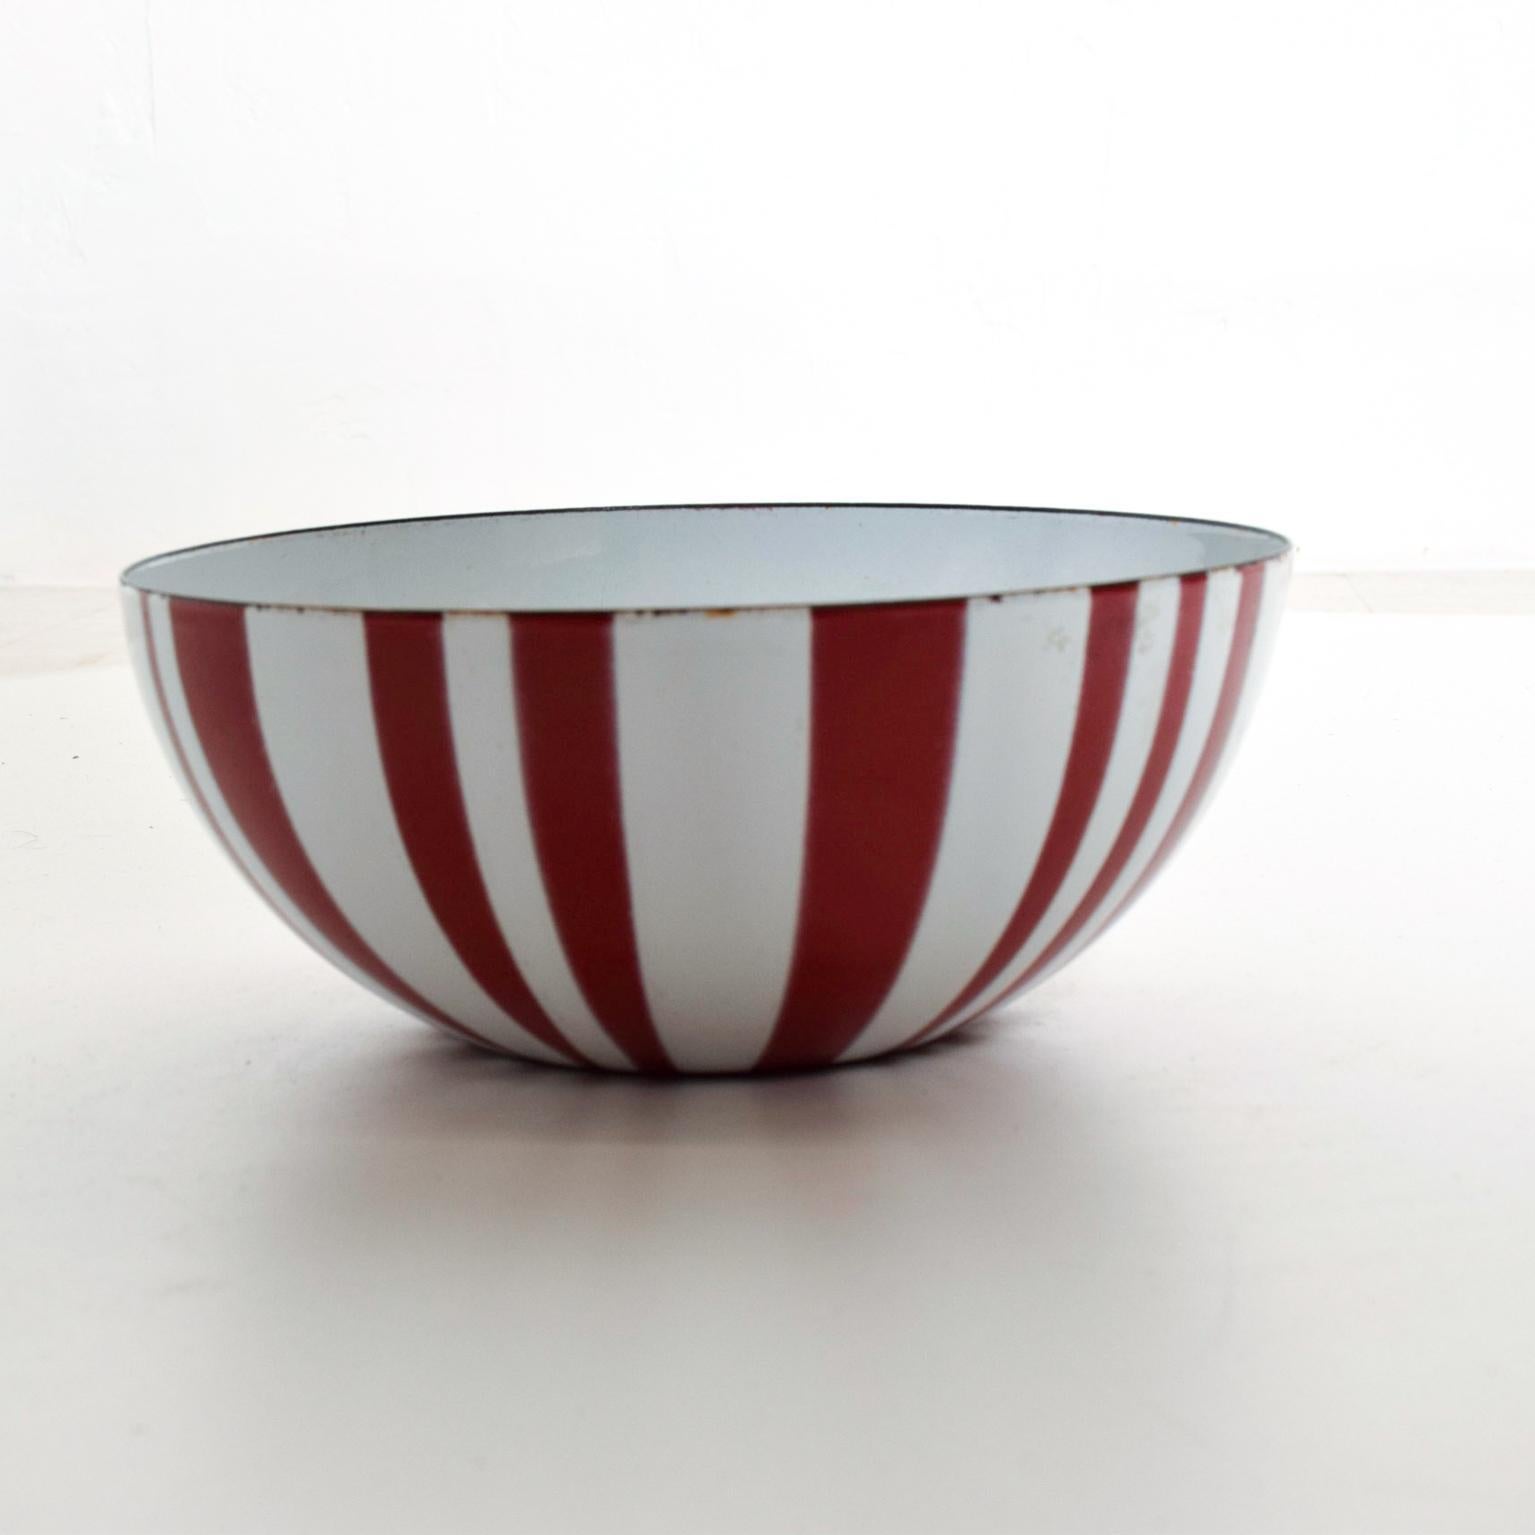 We are pleased to offer for your consideration, a vintage Catherine Holmes salad bowl with red stripes. Dimensions: 8